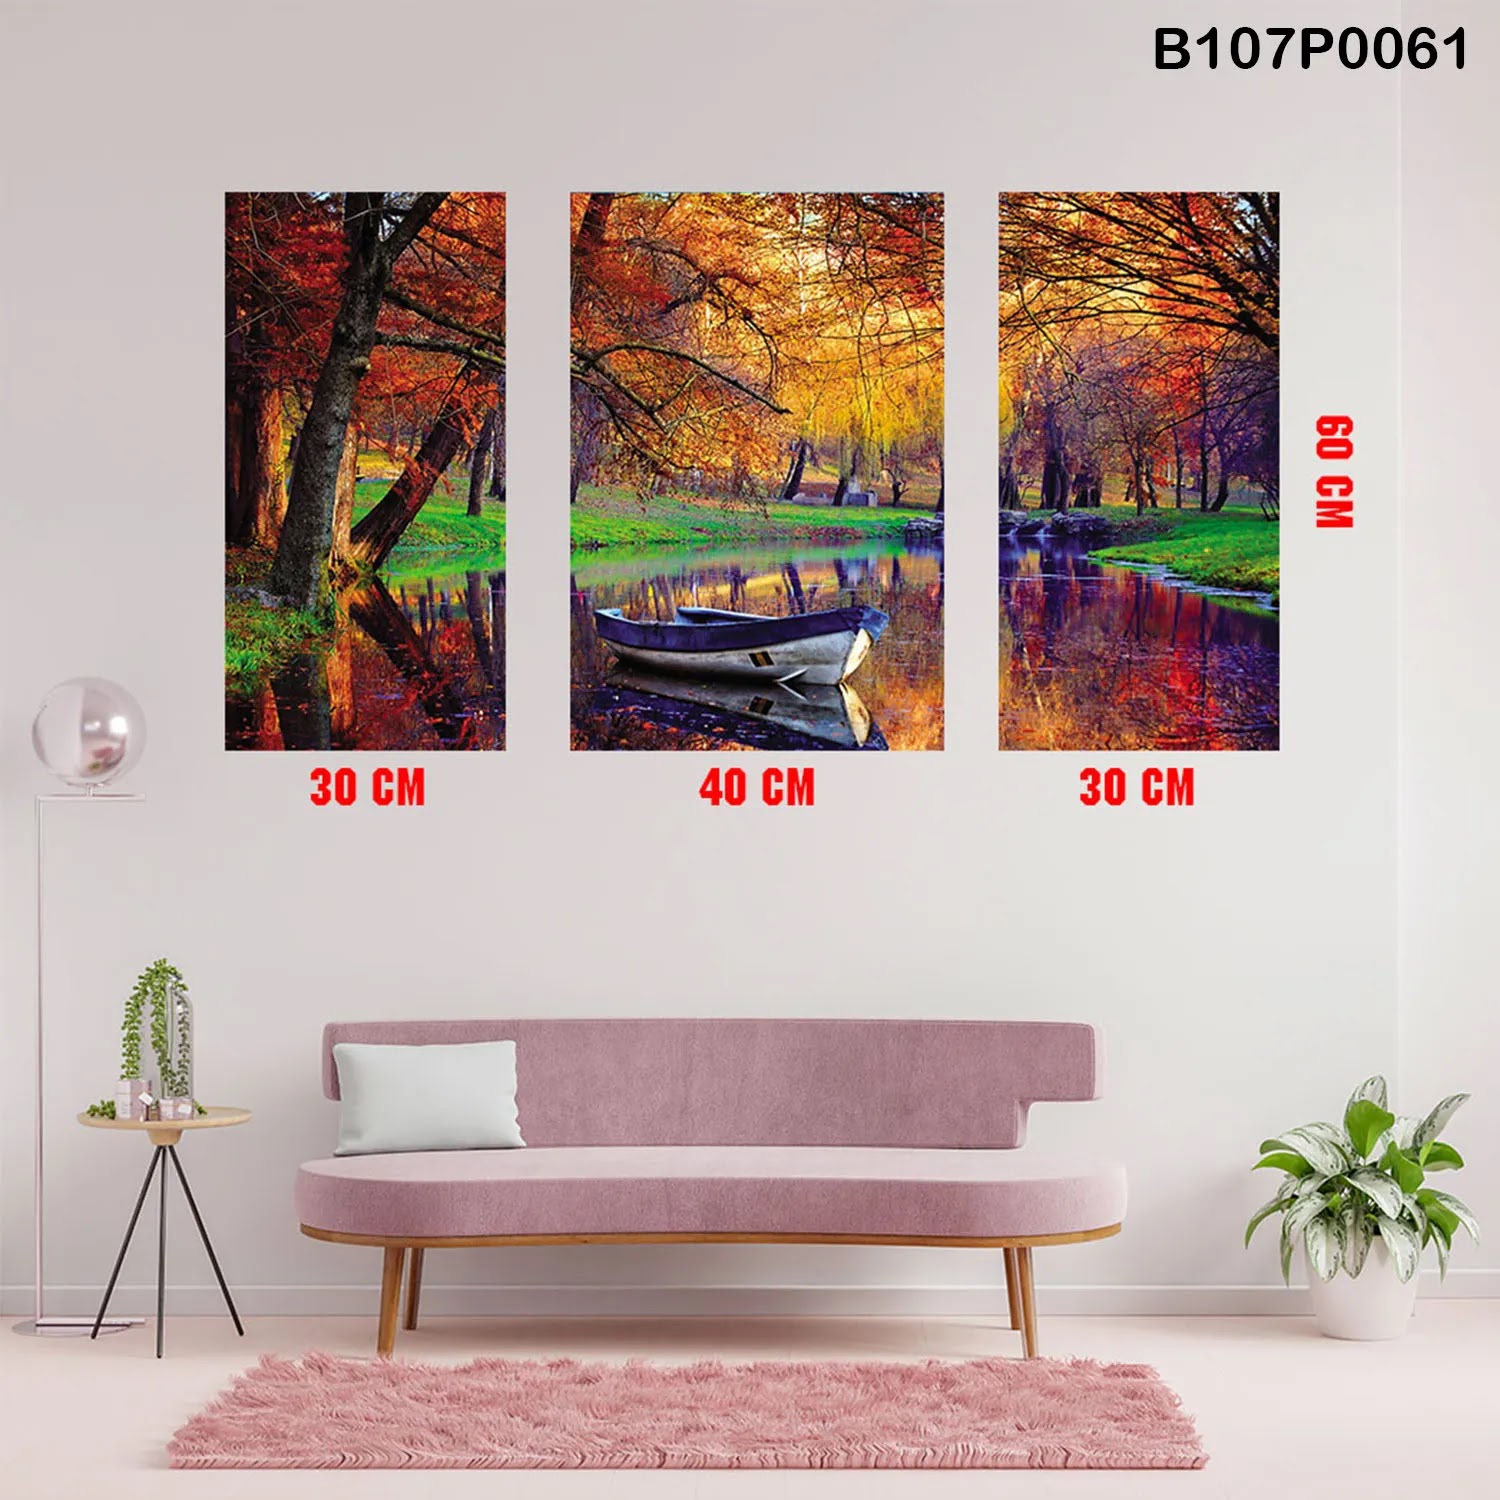 Triptych panel with a river and forest in autumn